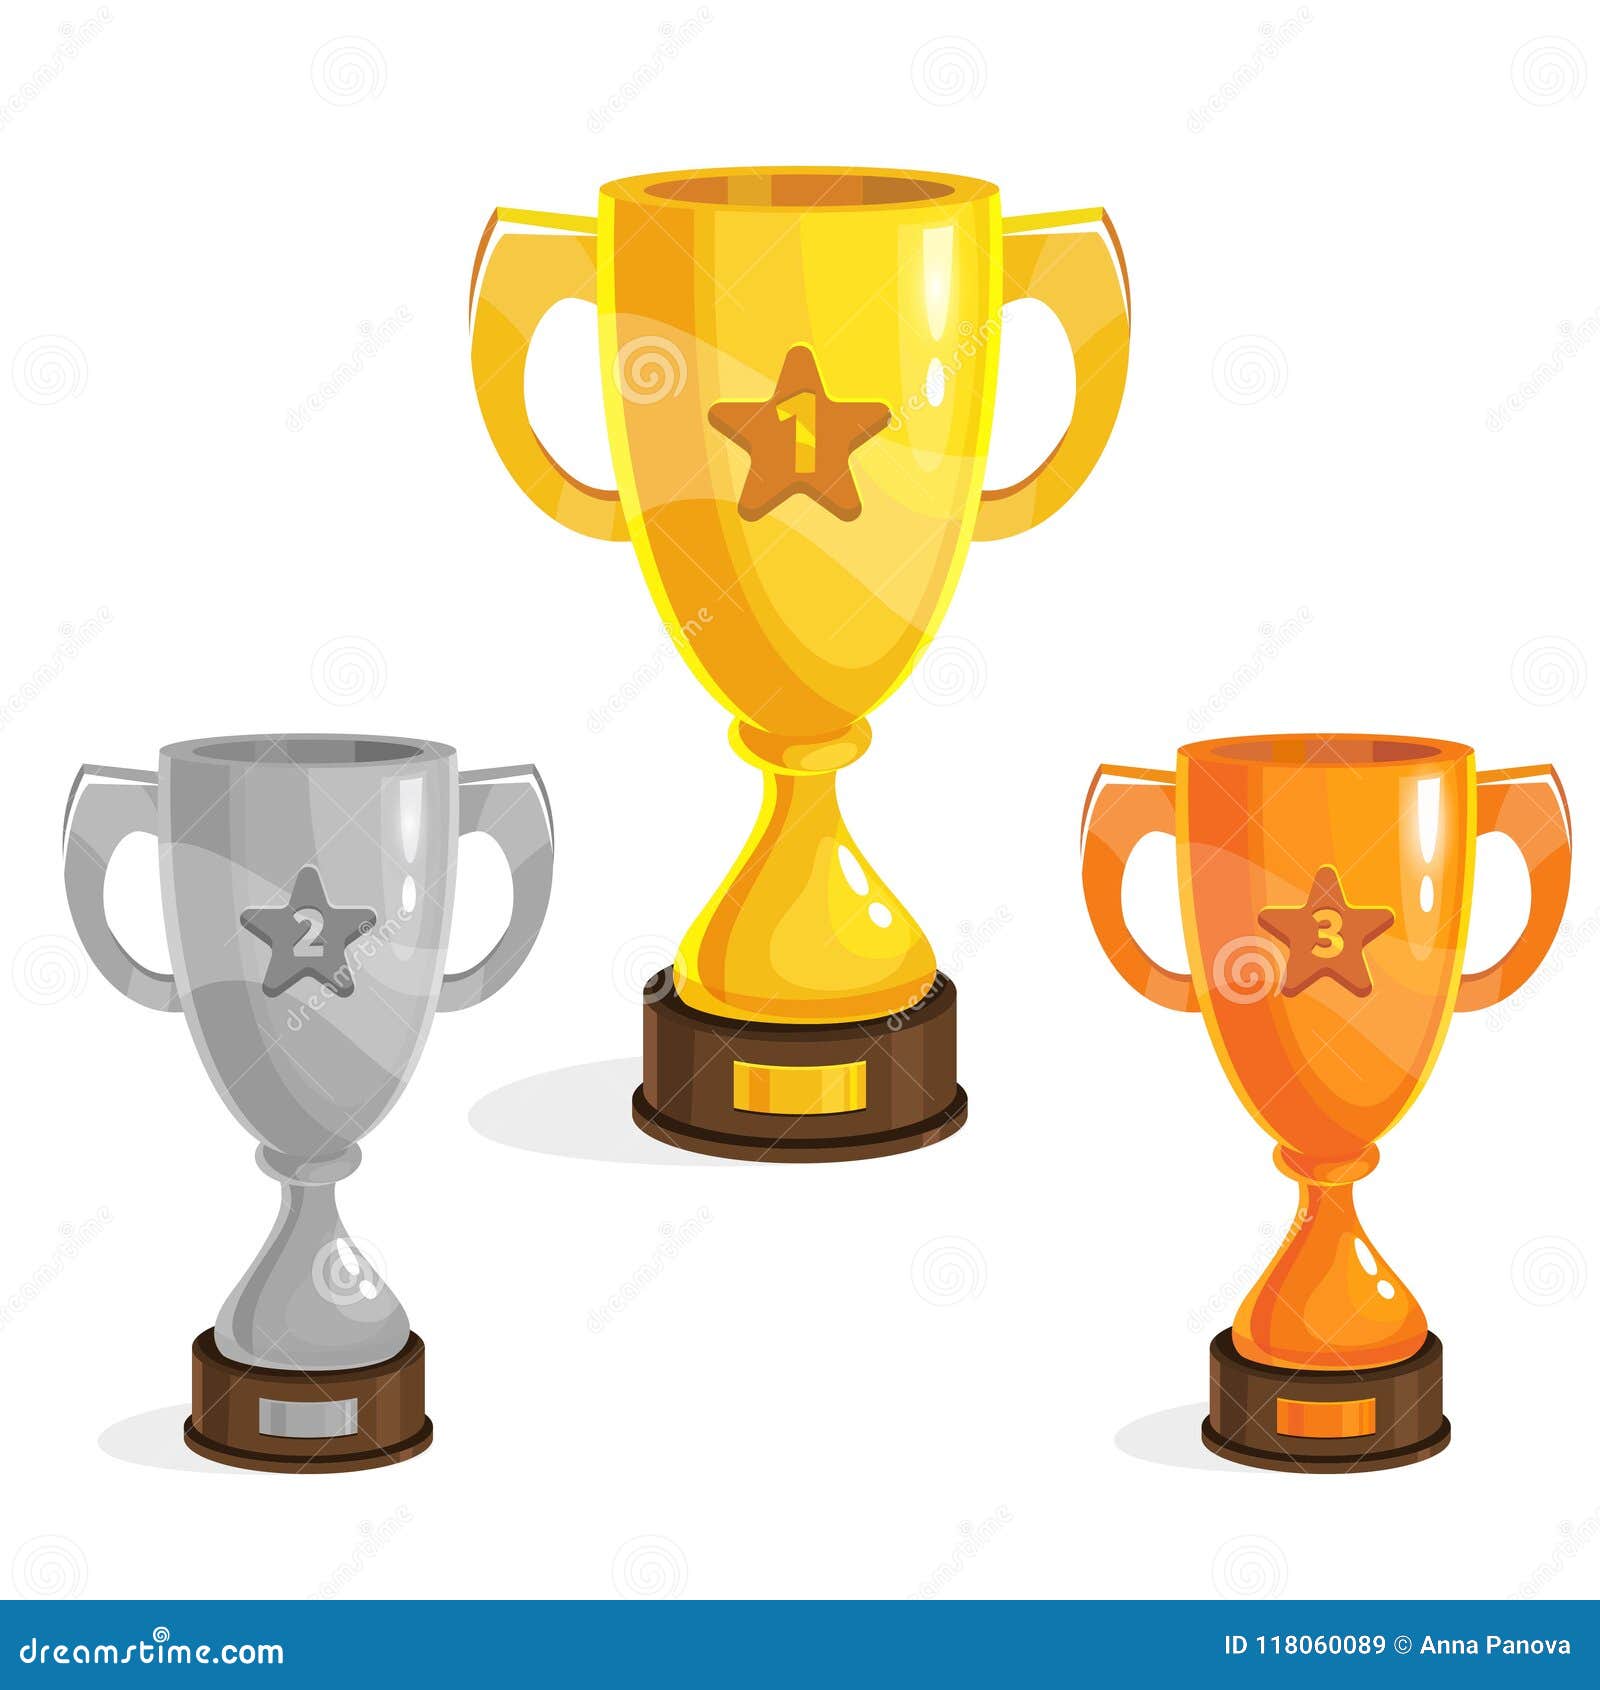 Cartoon Gold, Silver and Bronze Winner Cup for Game Design. Game Assets  Stock Vector - Illustration of silver, graphic: 118060089